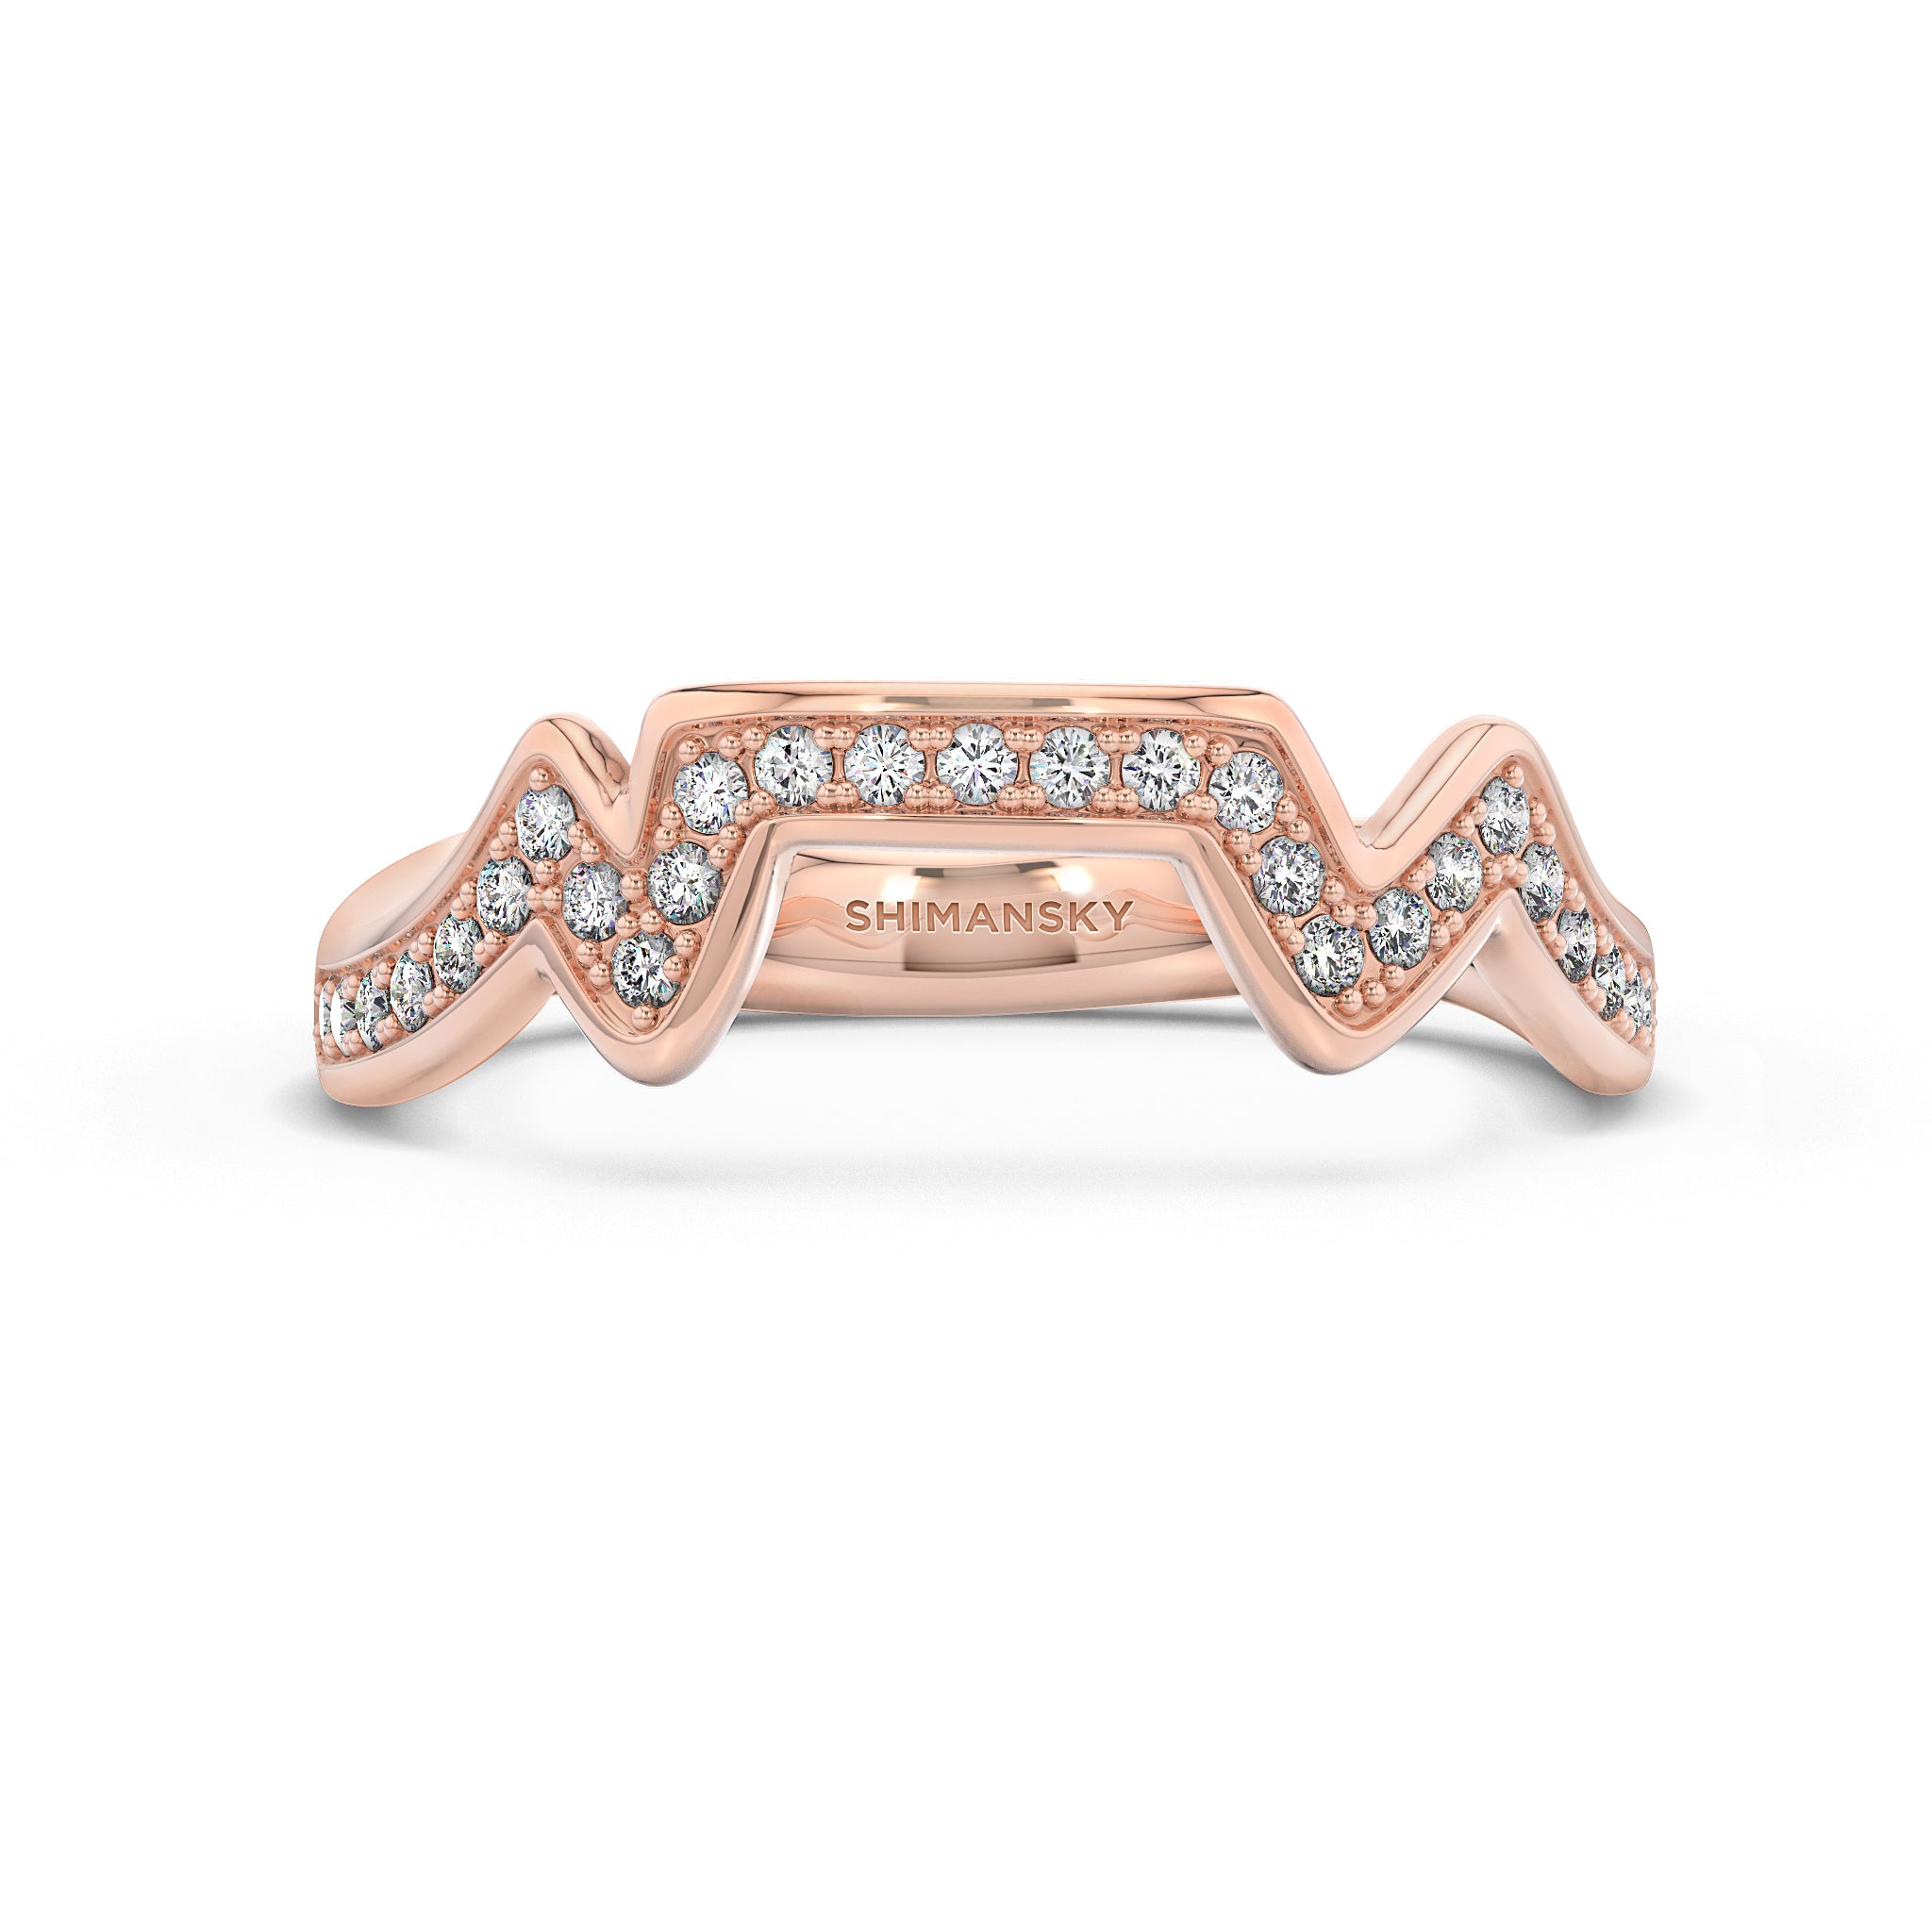 Shimansky - Table Mountain Pave Diamond Ring Crafted in 14K Rose Gold